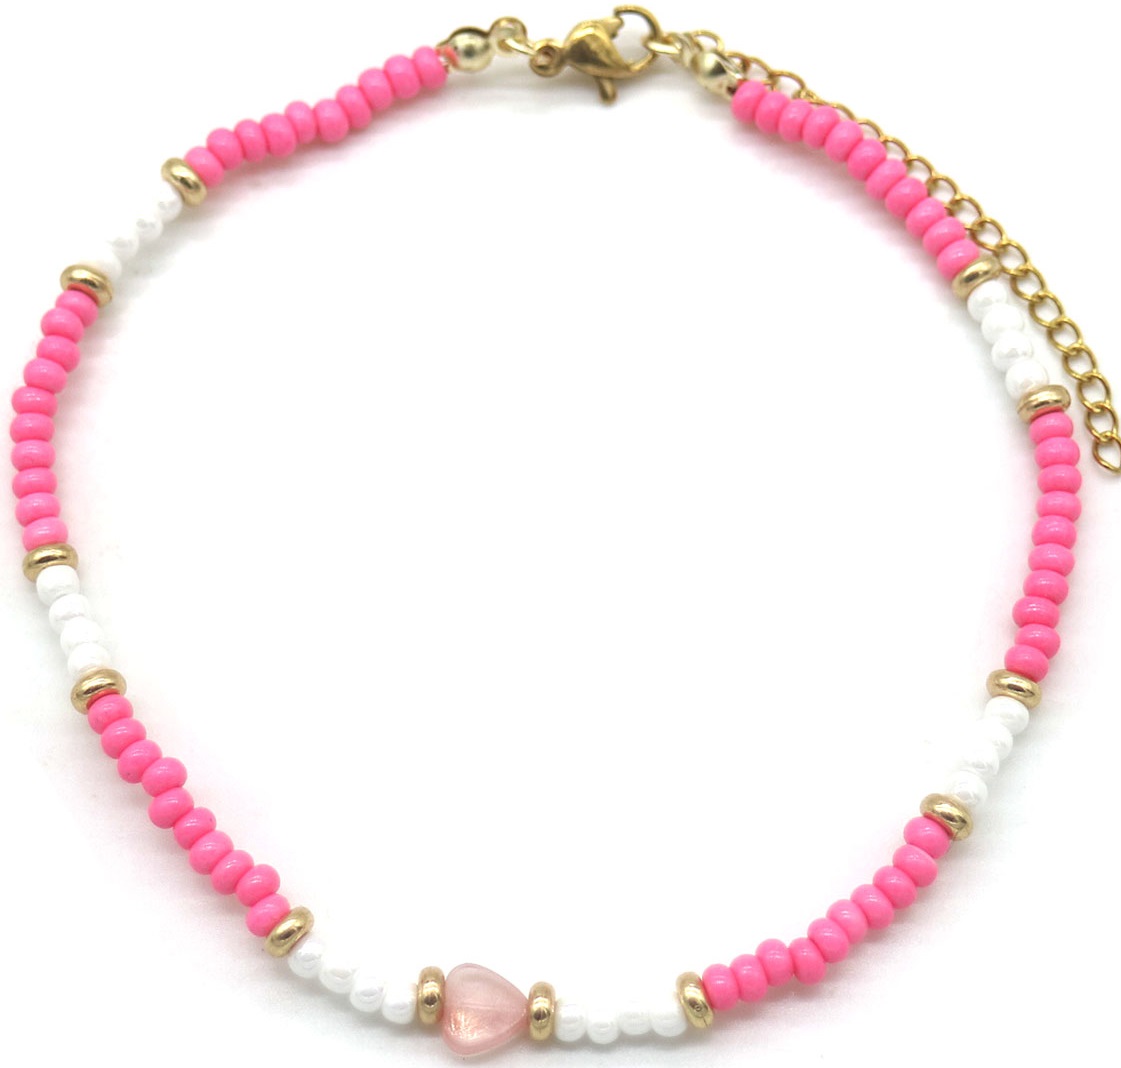 G-A1.1 ANK830-078-3 Anklet Heart Pink